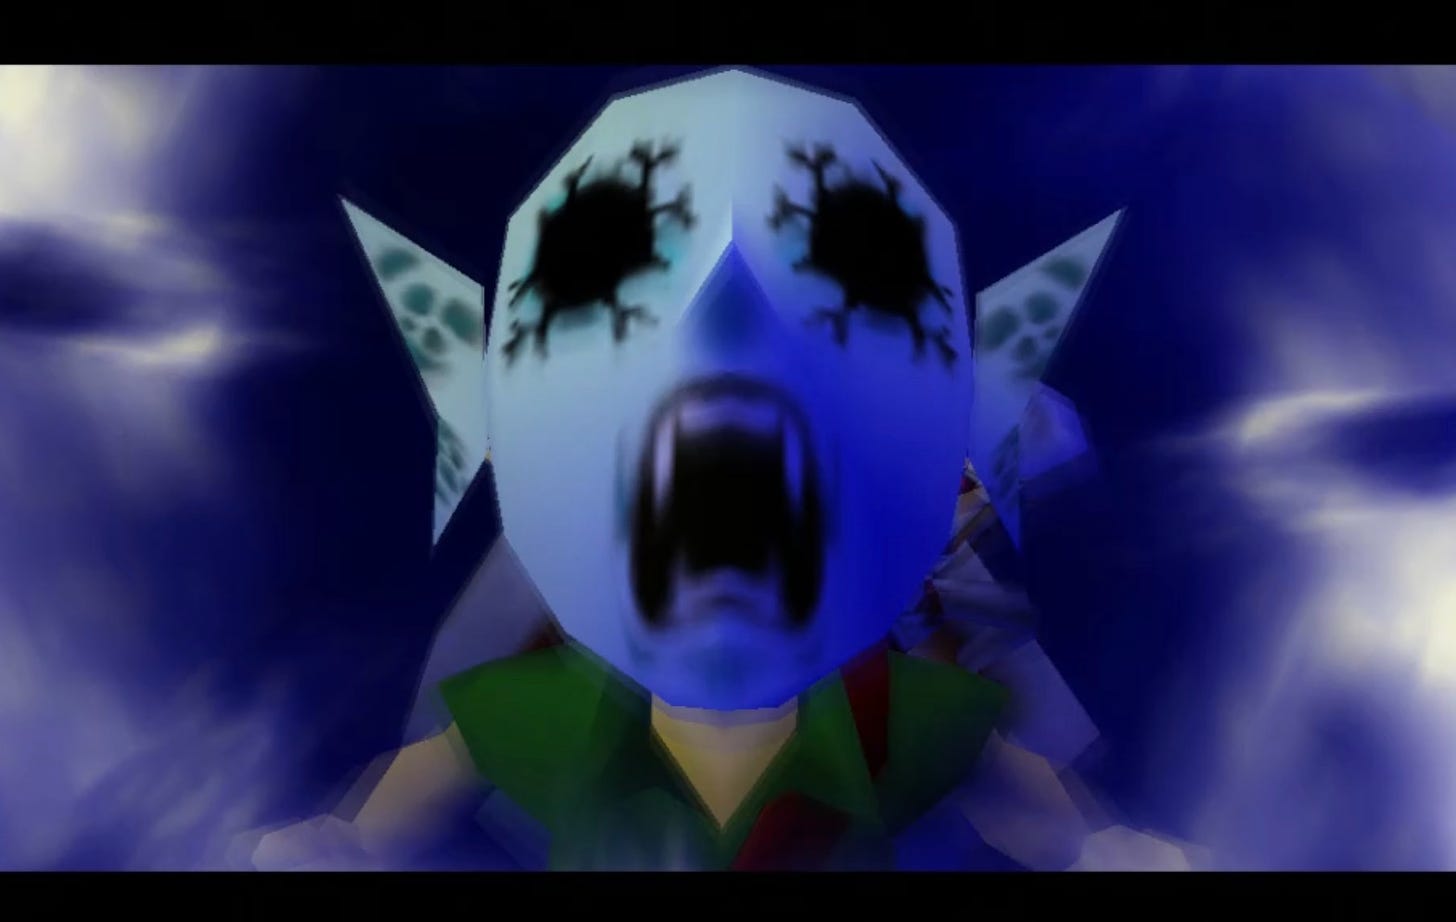 Link putting on the transformative (and seemingly painful) Zora mask.